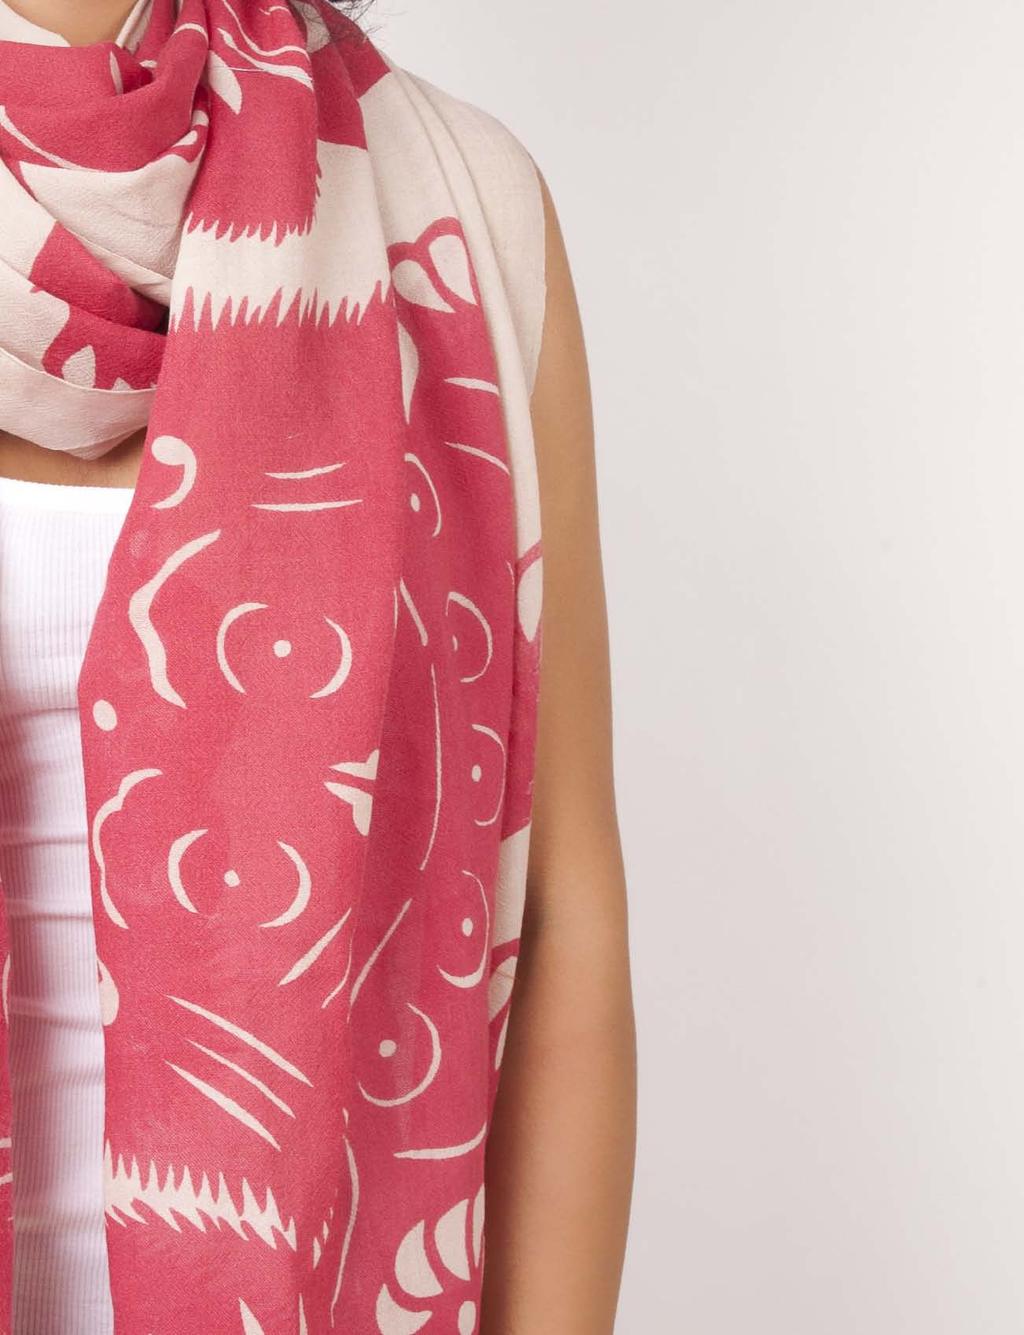 EXTRA LONG WOOL SCARVES Our new scarf collection is made of a fine merino wool.